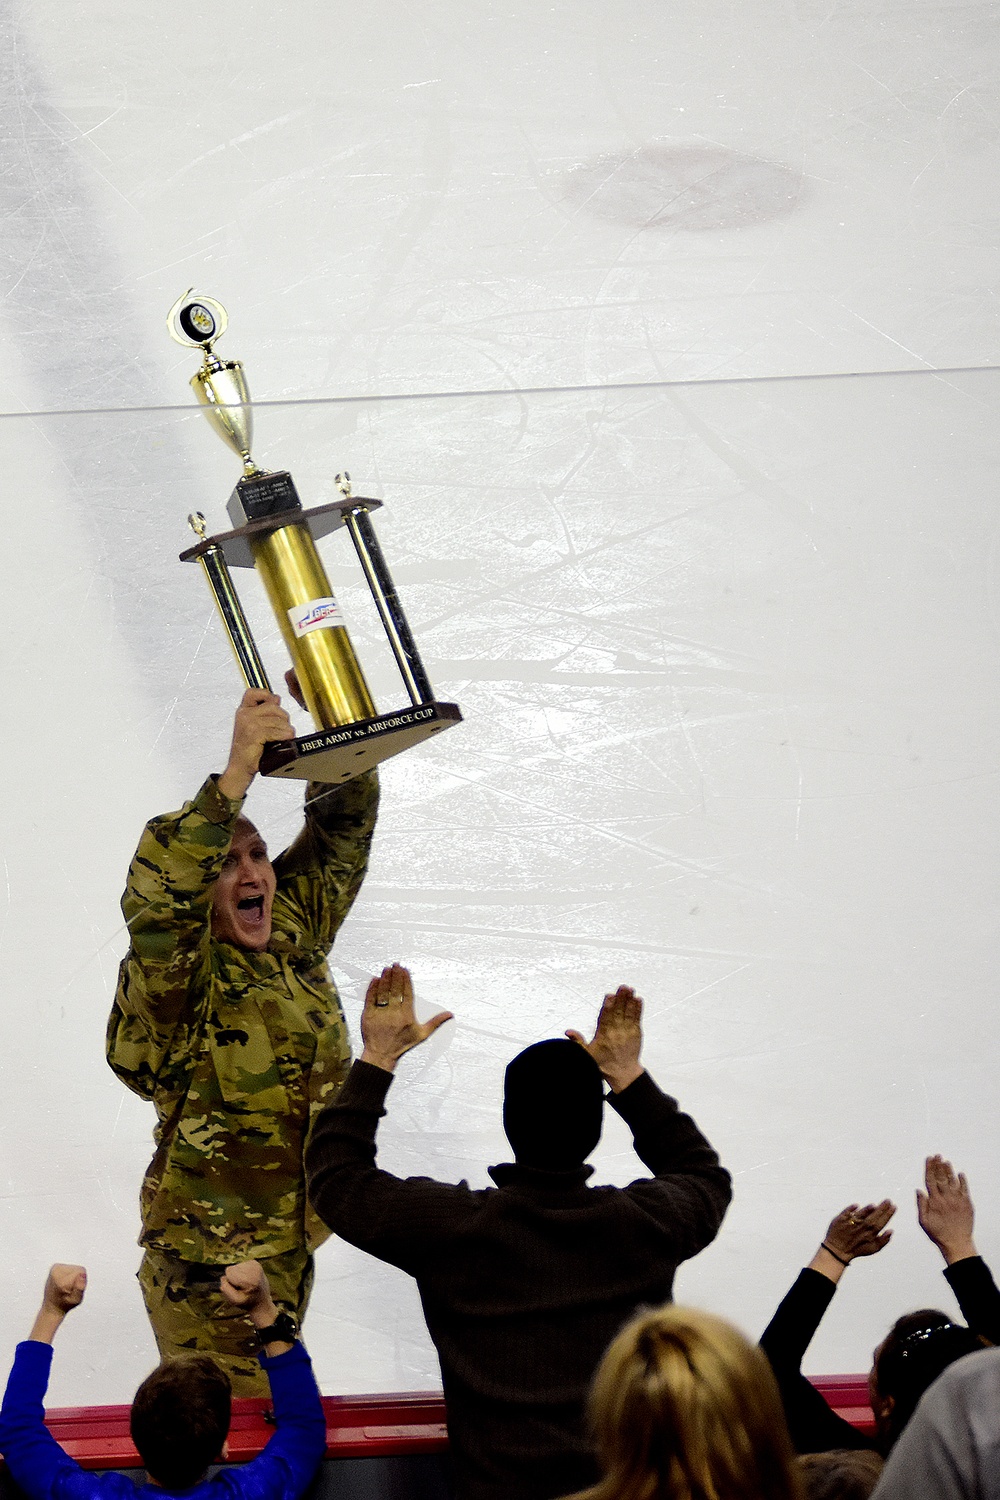 Army skates to 5-0 hockey win over Air Force